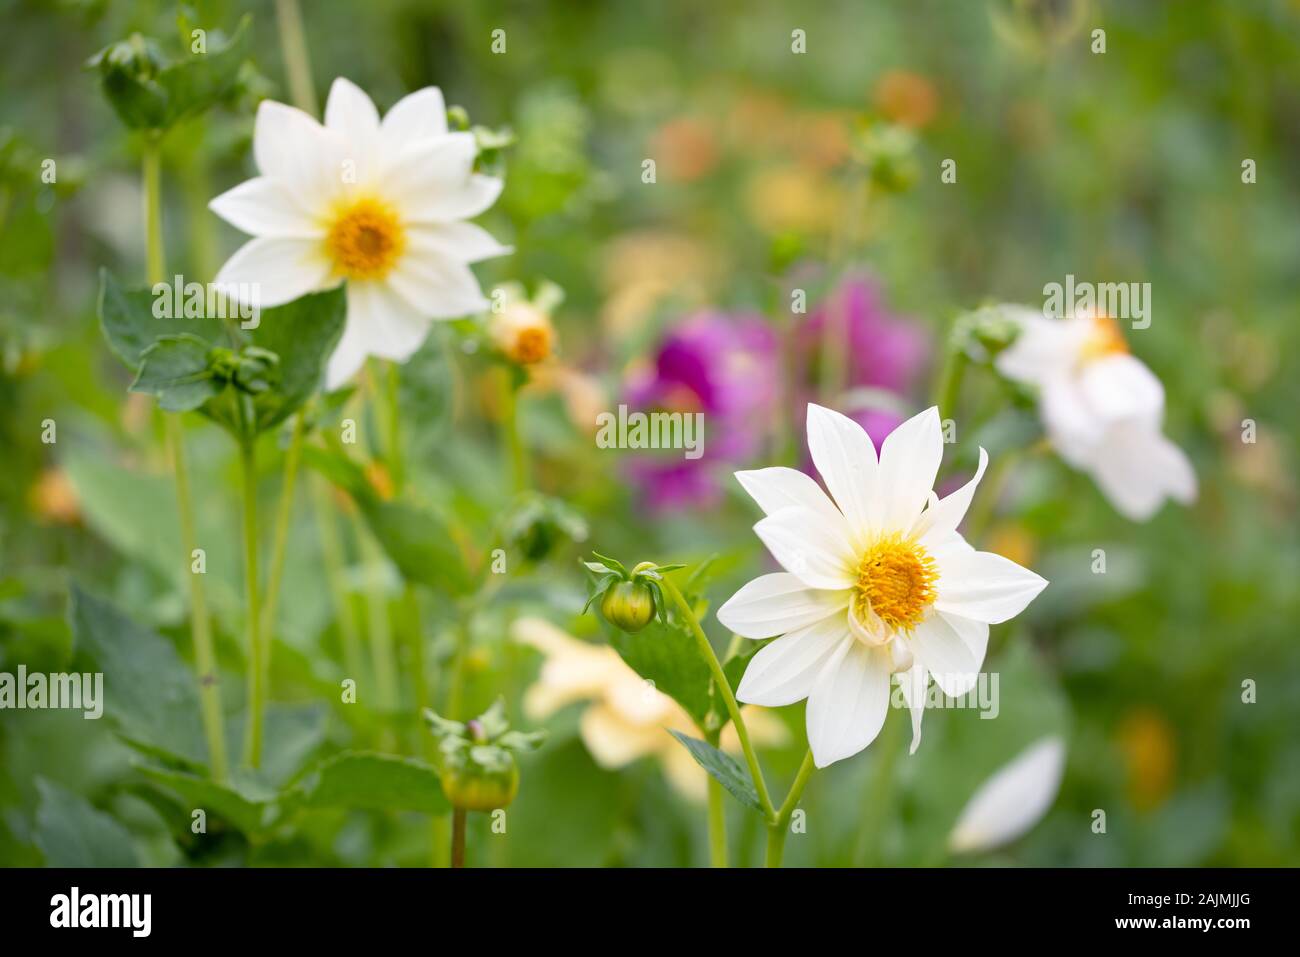 White anemone flowers in the field of flowers in the garden Stock Photo